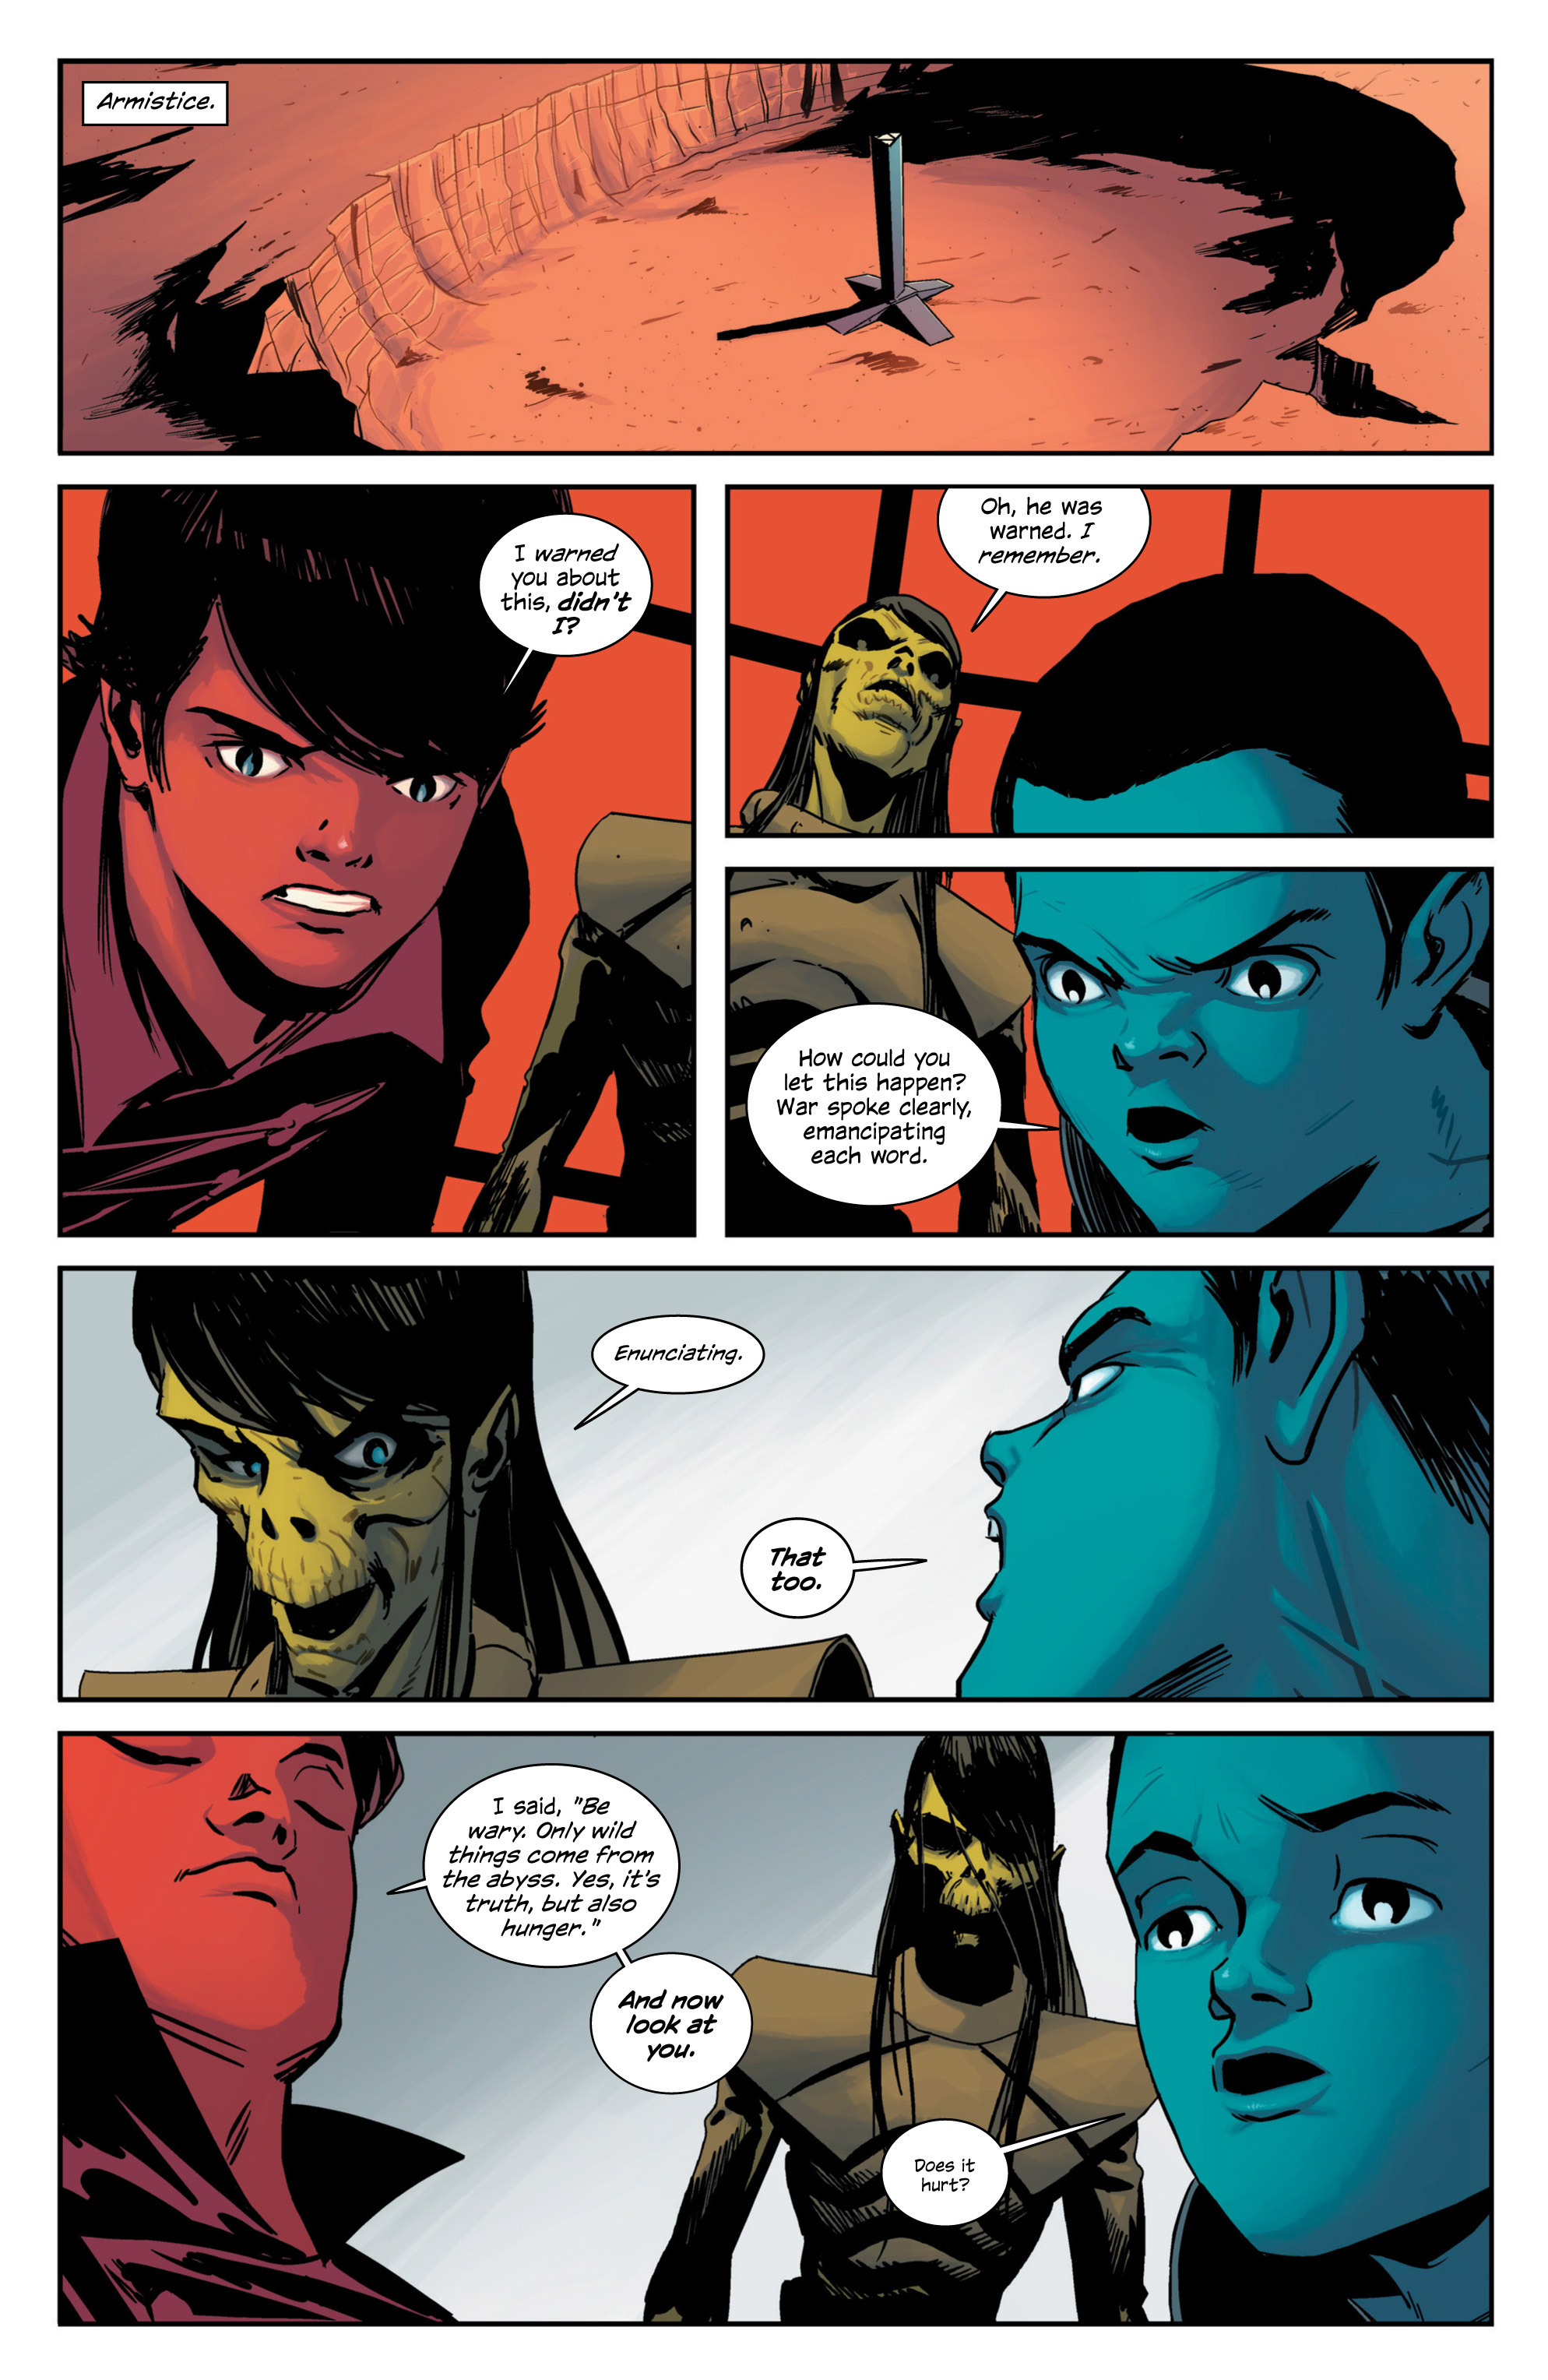 East of West (2013-): Chapter 7 - Page 3